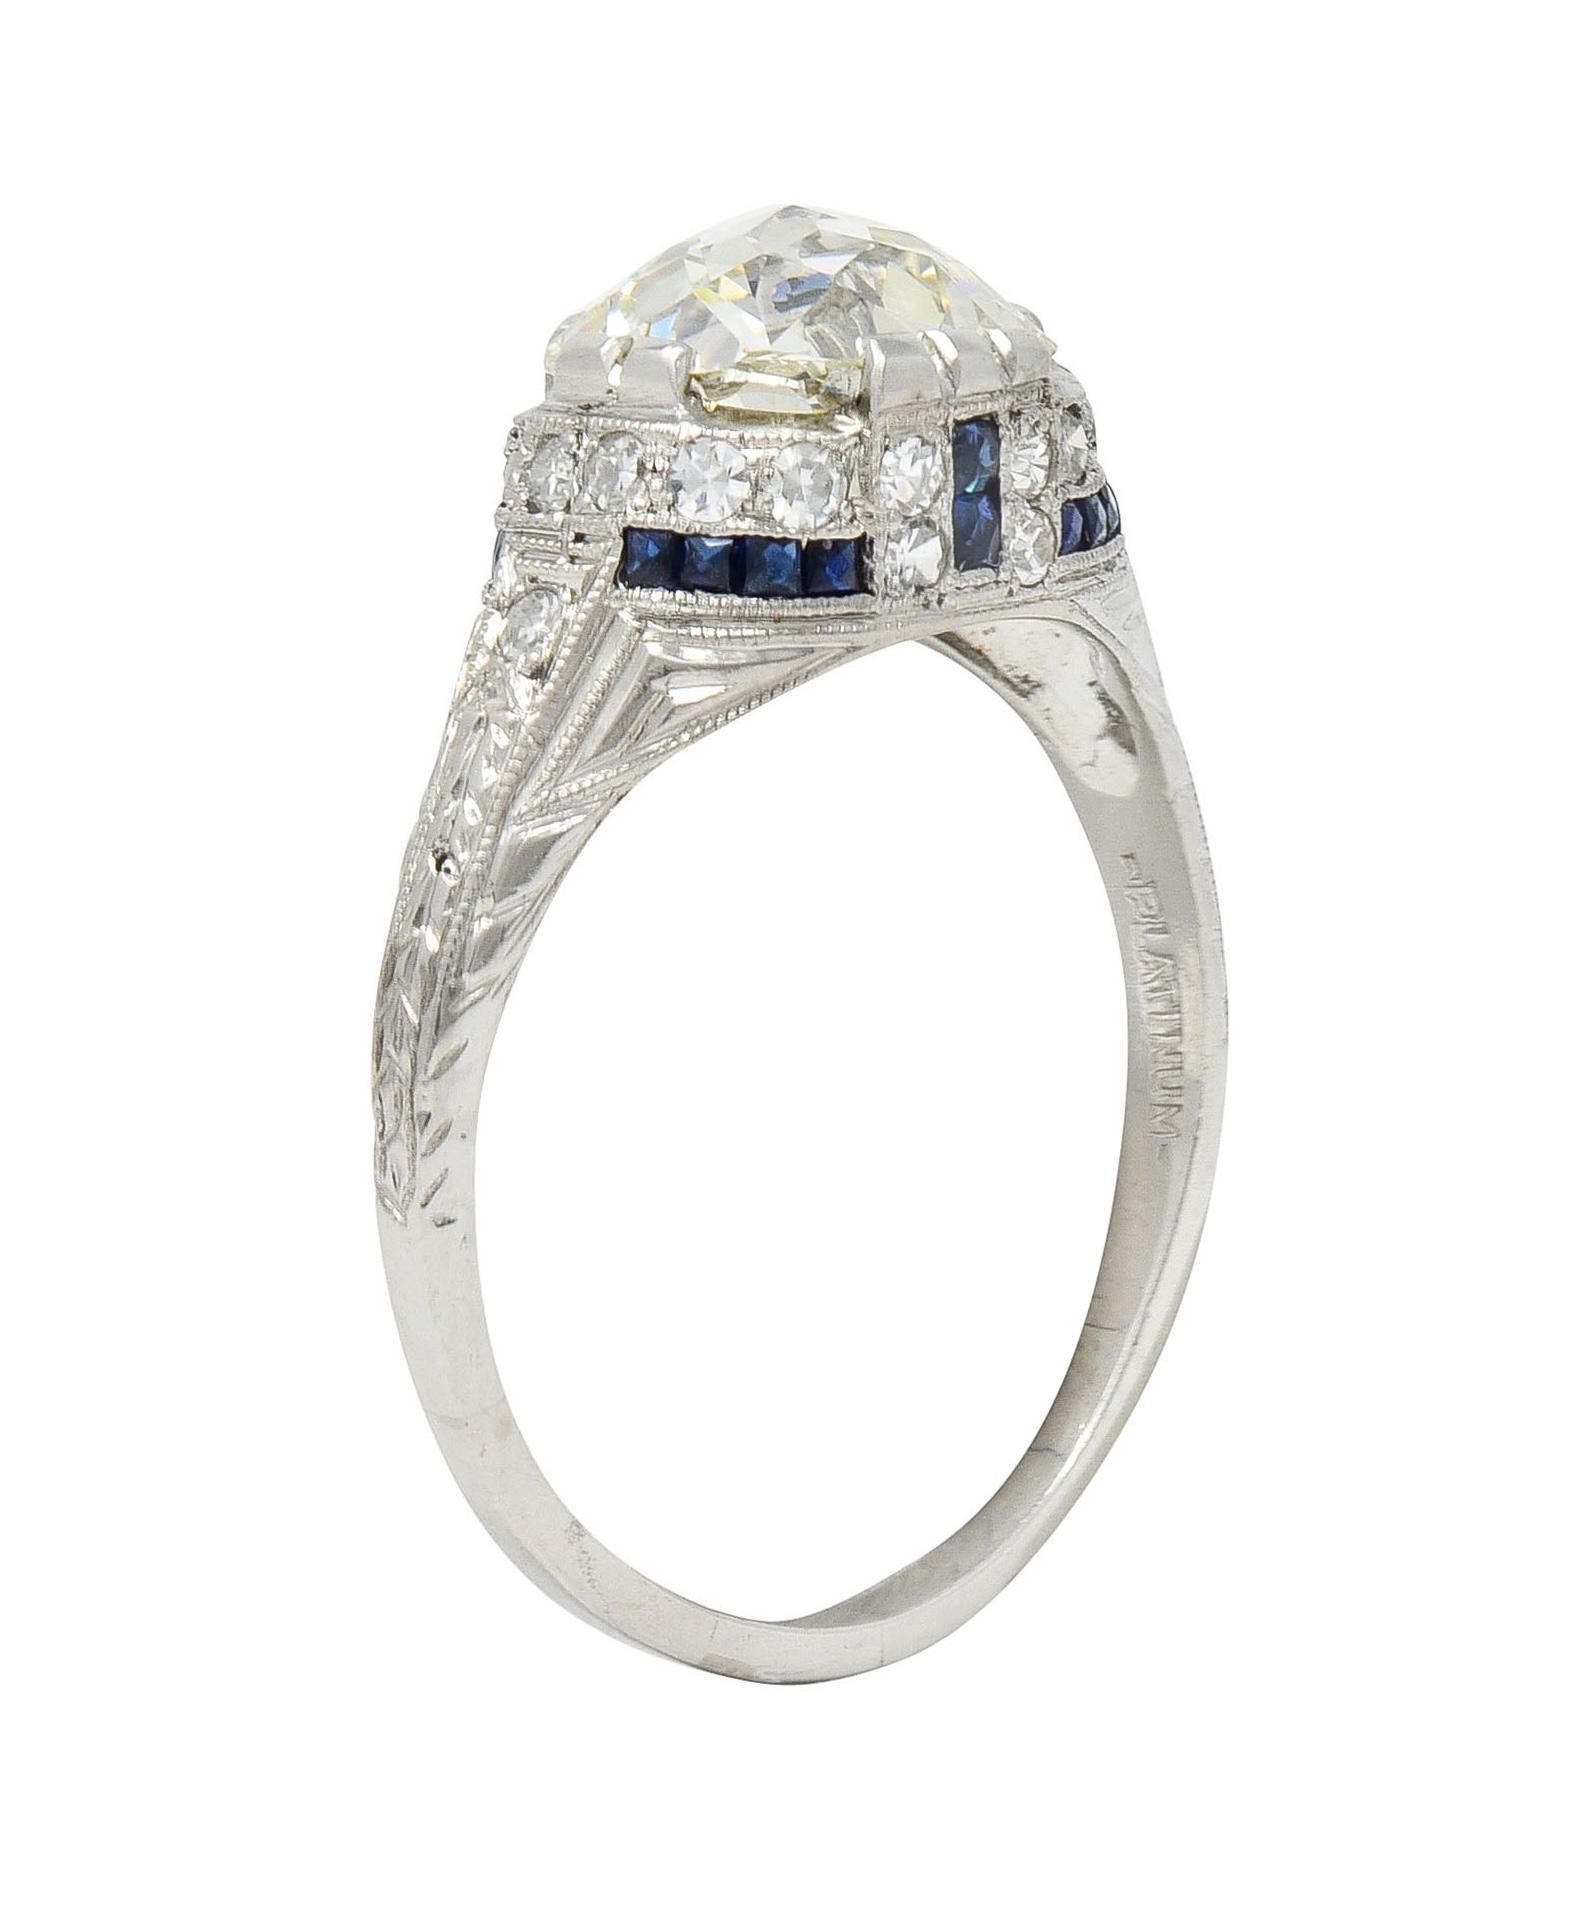 Centering a Jubilee cut diamond weighing 2.59 carats - N color with VS2 clarity
Set with split tab-like prongs with a milgrain detailed geometric motif gallery 
Channel set with rows of transparent medium blue French cut sapphires 
Weighing